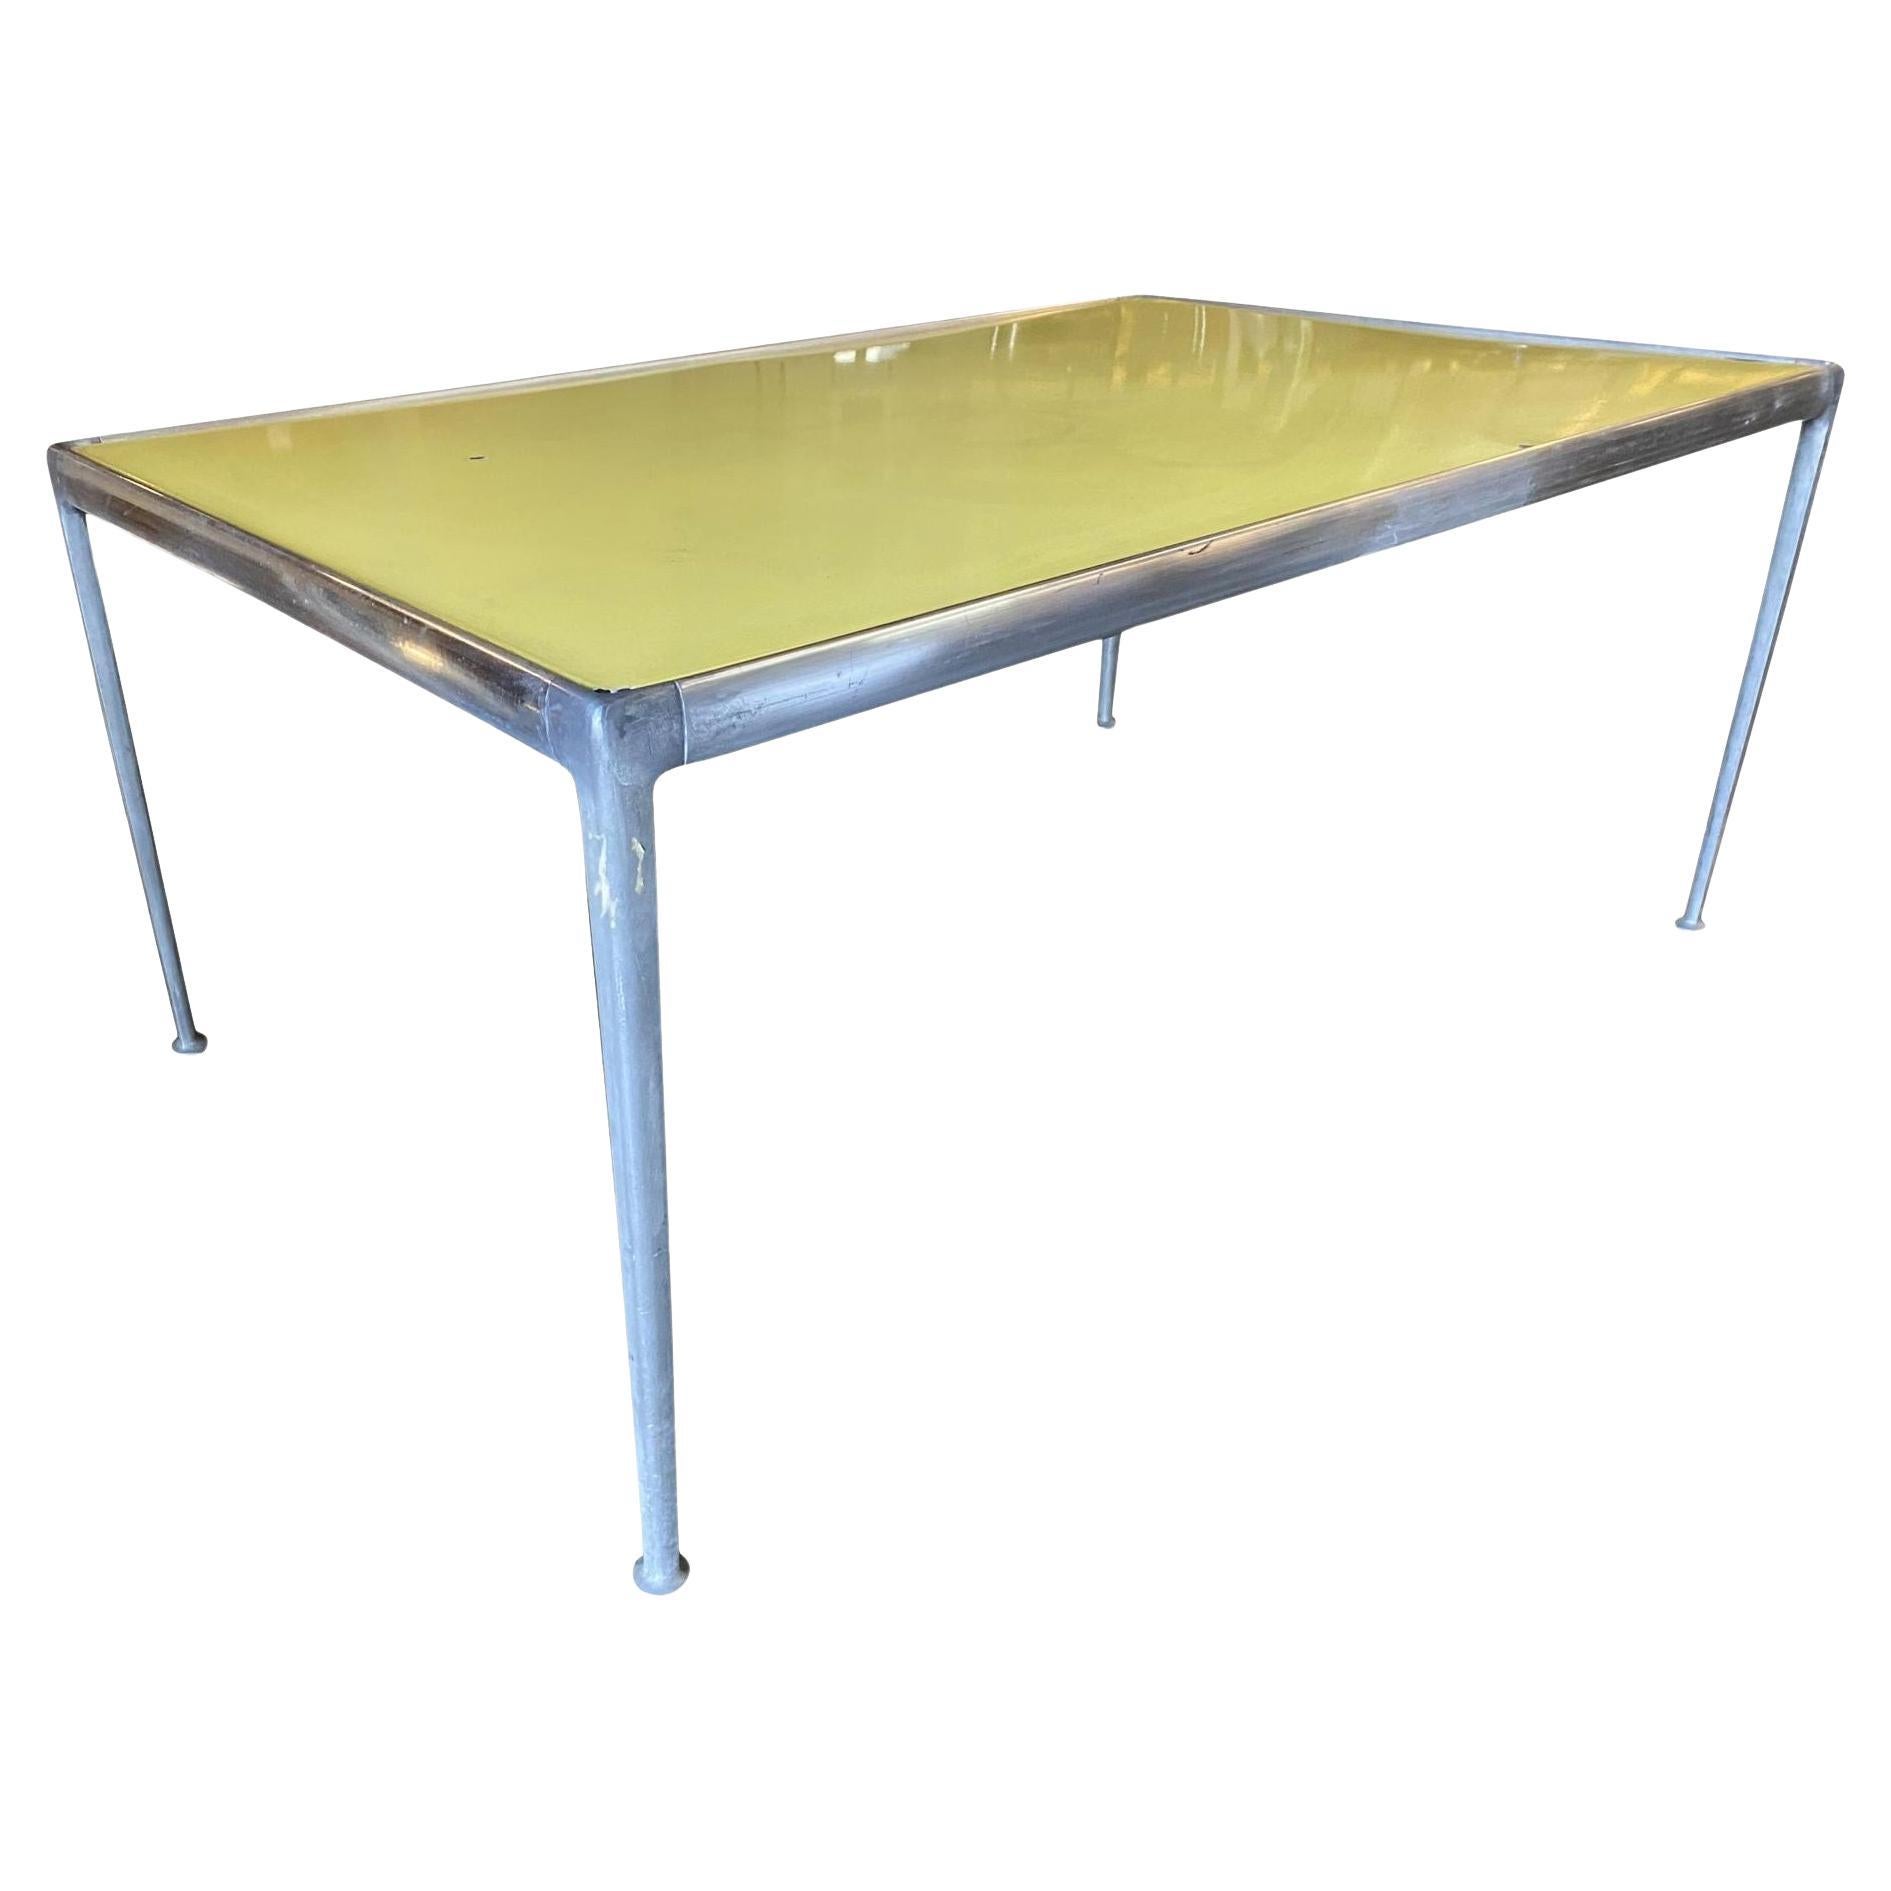 Rare Aluminum Midcentury Dining Table by Richard Shultz, circa 1966 For Sale